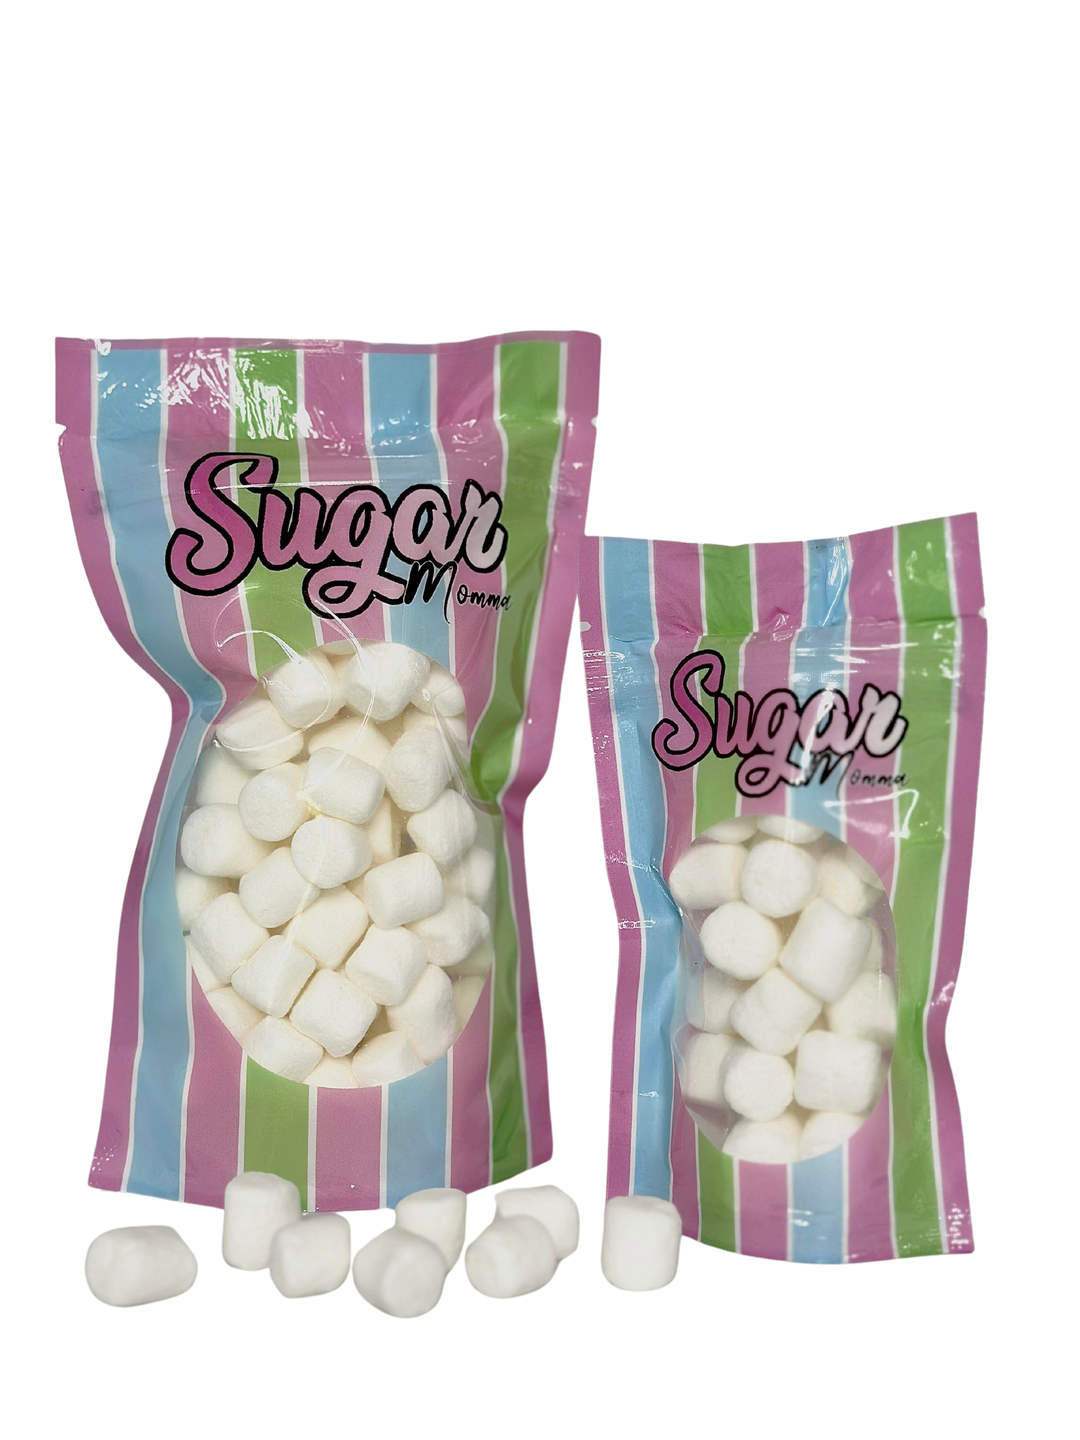 Marshmallow freeze dried candy